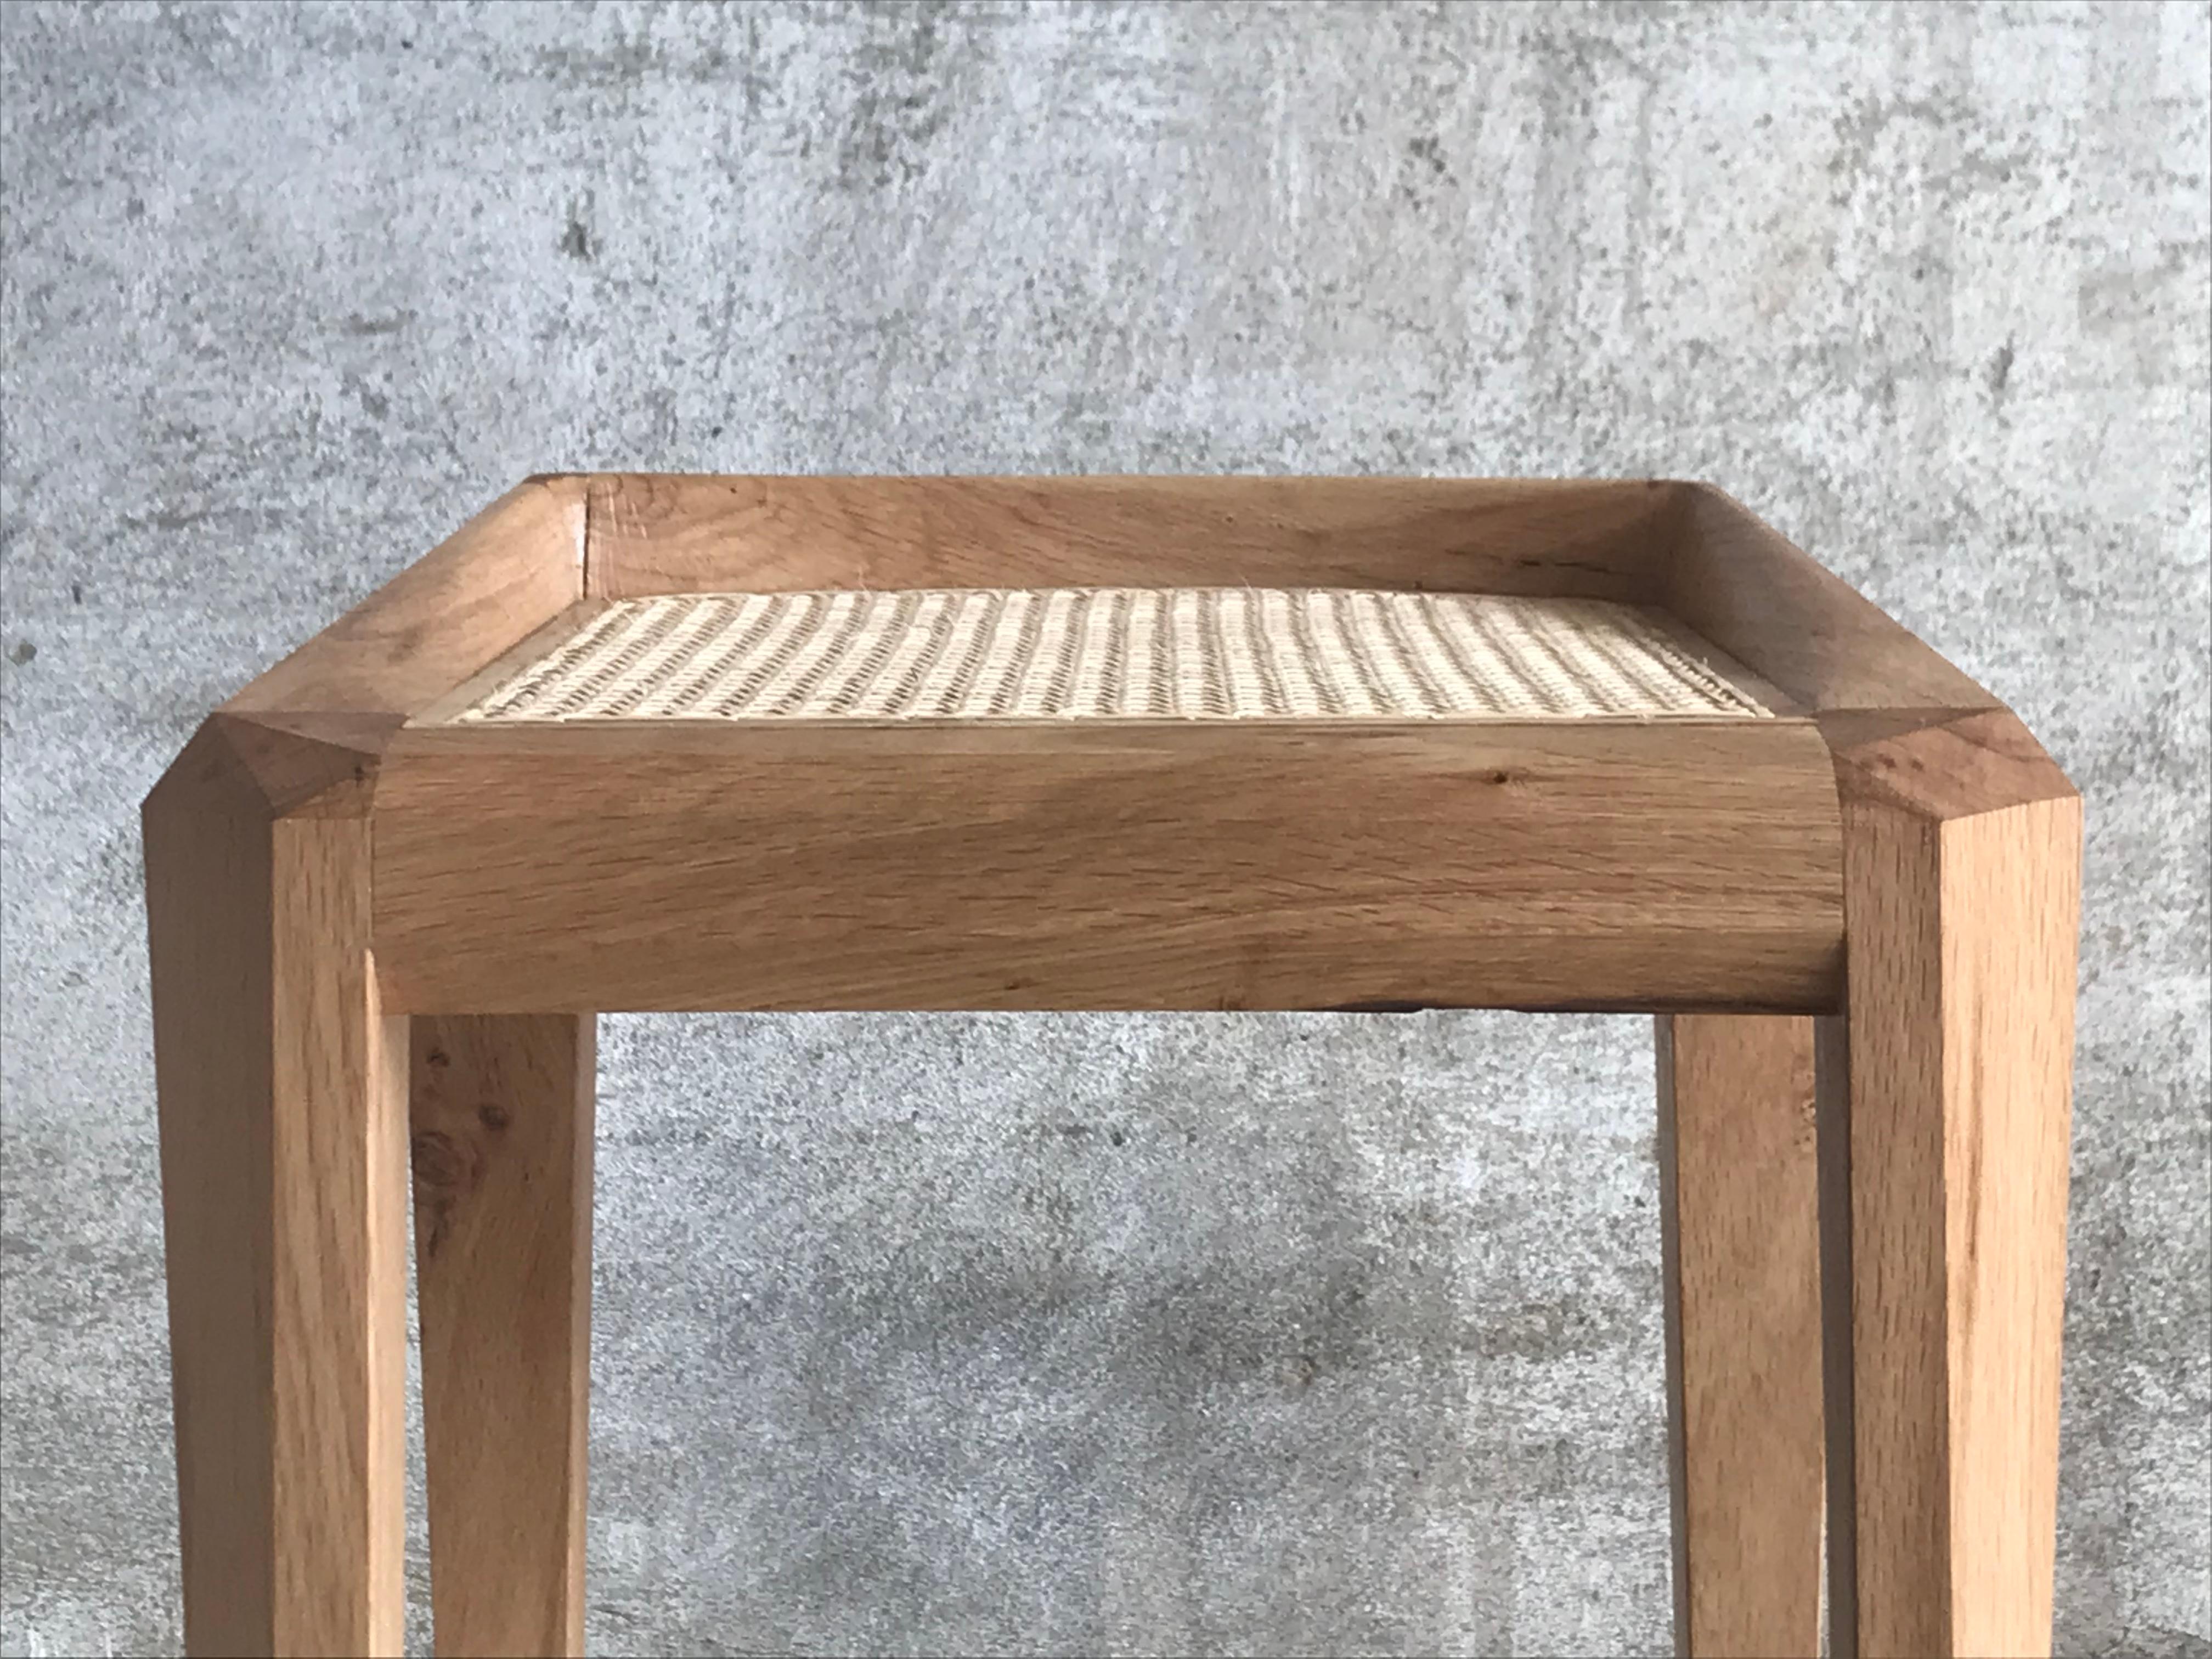 This carefully designed and handcrafted contemporary bar stool with a rattan weaved seat is an elegant and sophisticated stool for a kitchen or home bar, designed and made by Tomaz Viana.
Its geometrical side view was designed as a playful visual